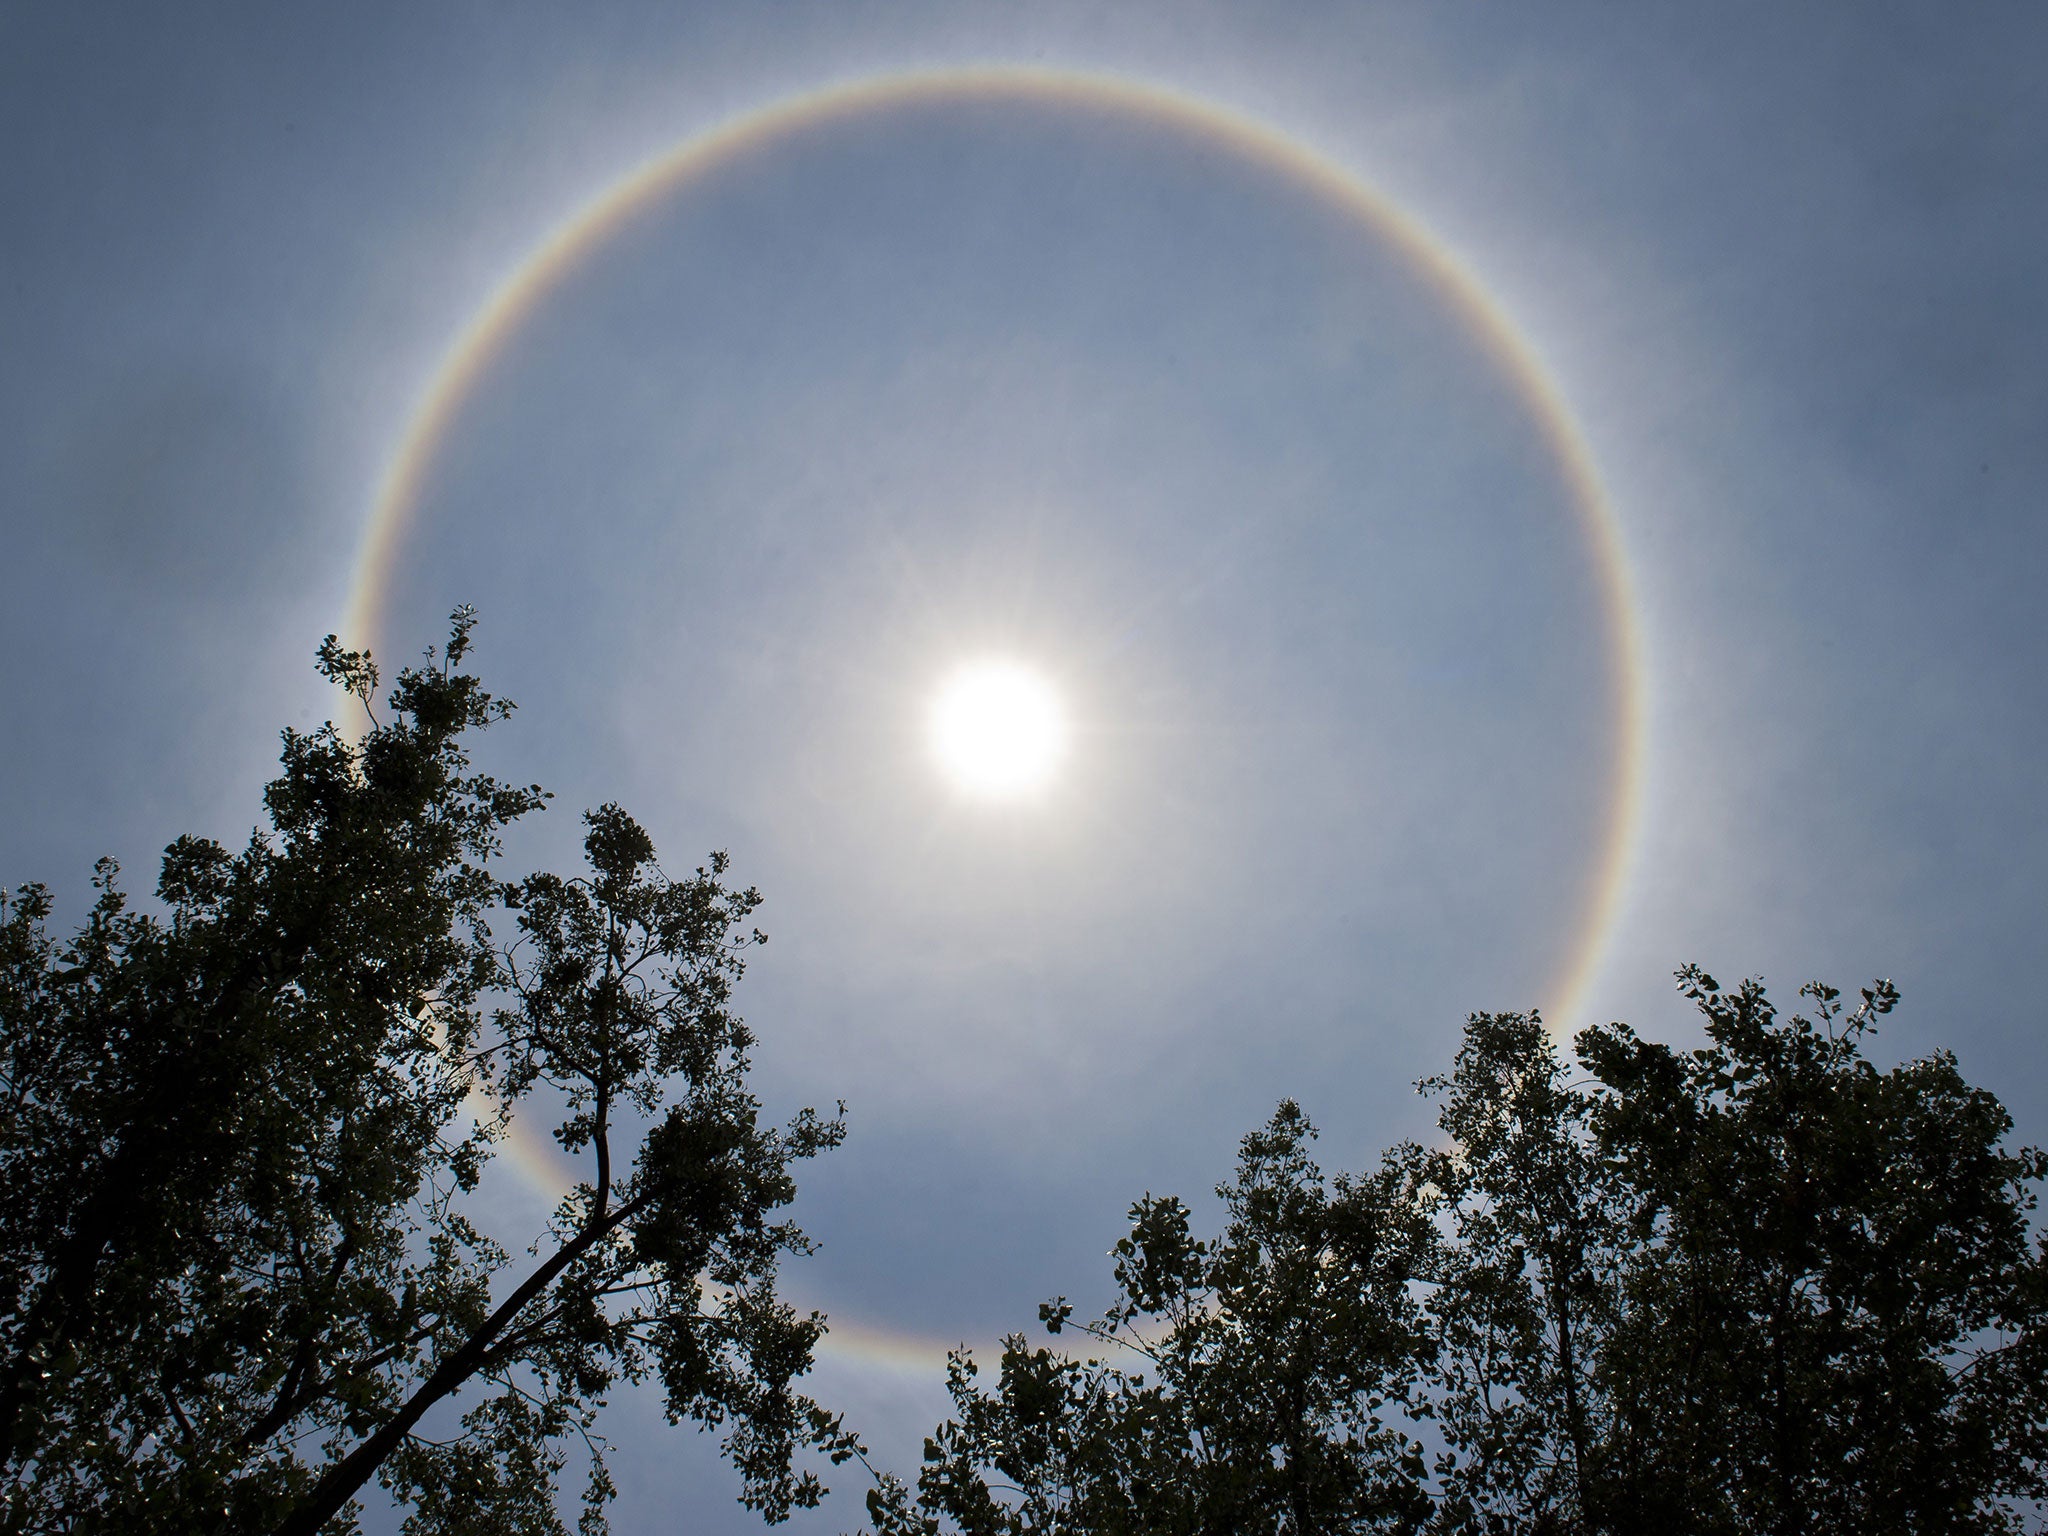 Did You See It? Sunday's Halo Around The Sun Explained - CBS Boston